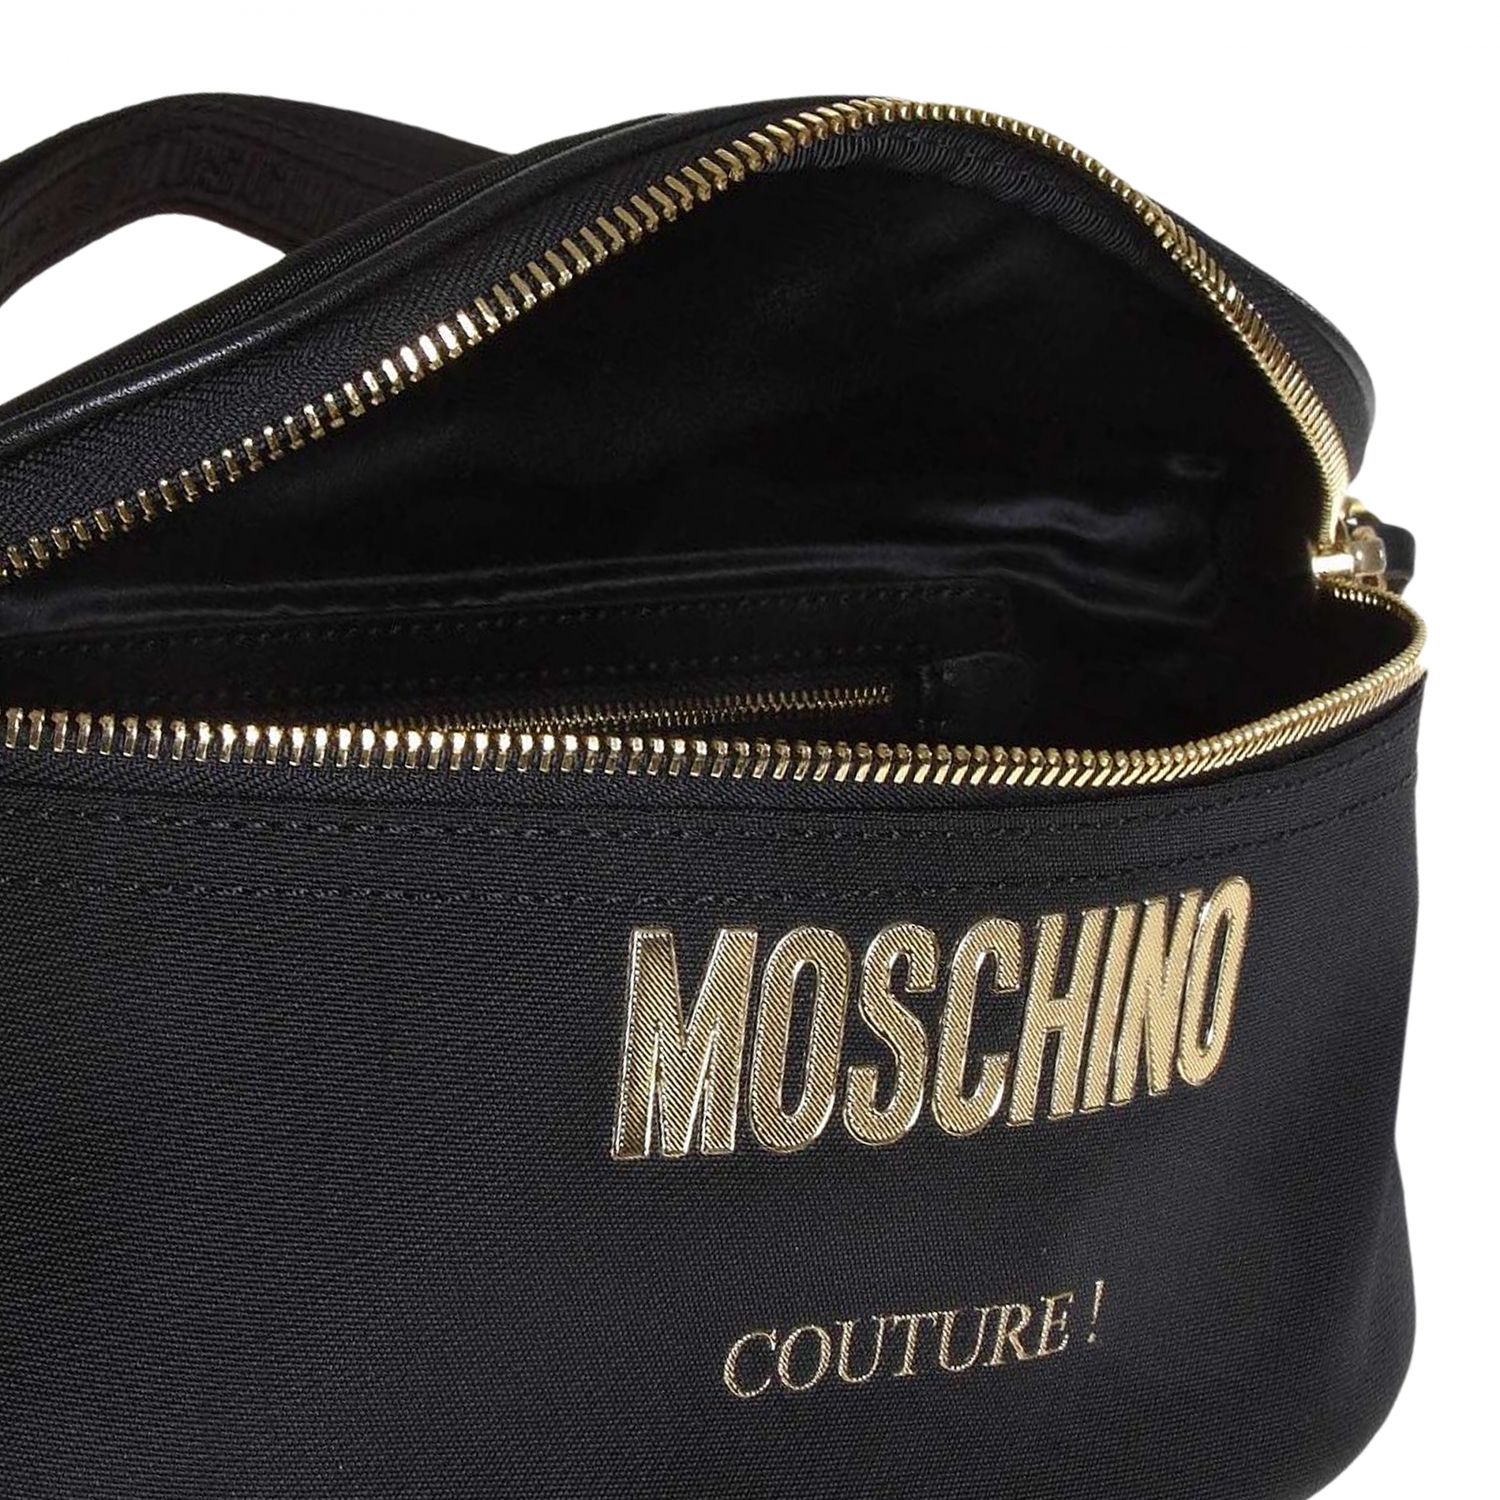 Moschino Couture Outlet: belt bag for women - Black | Moschino Couture ...